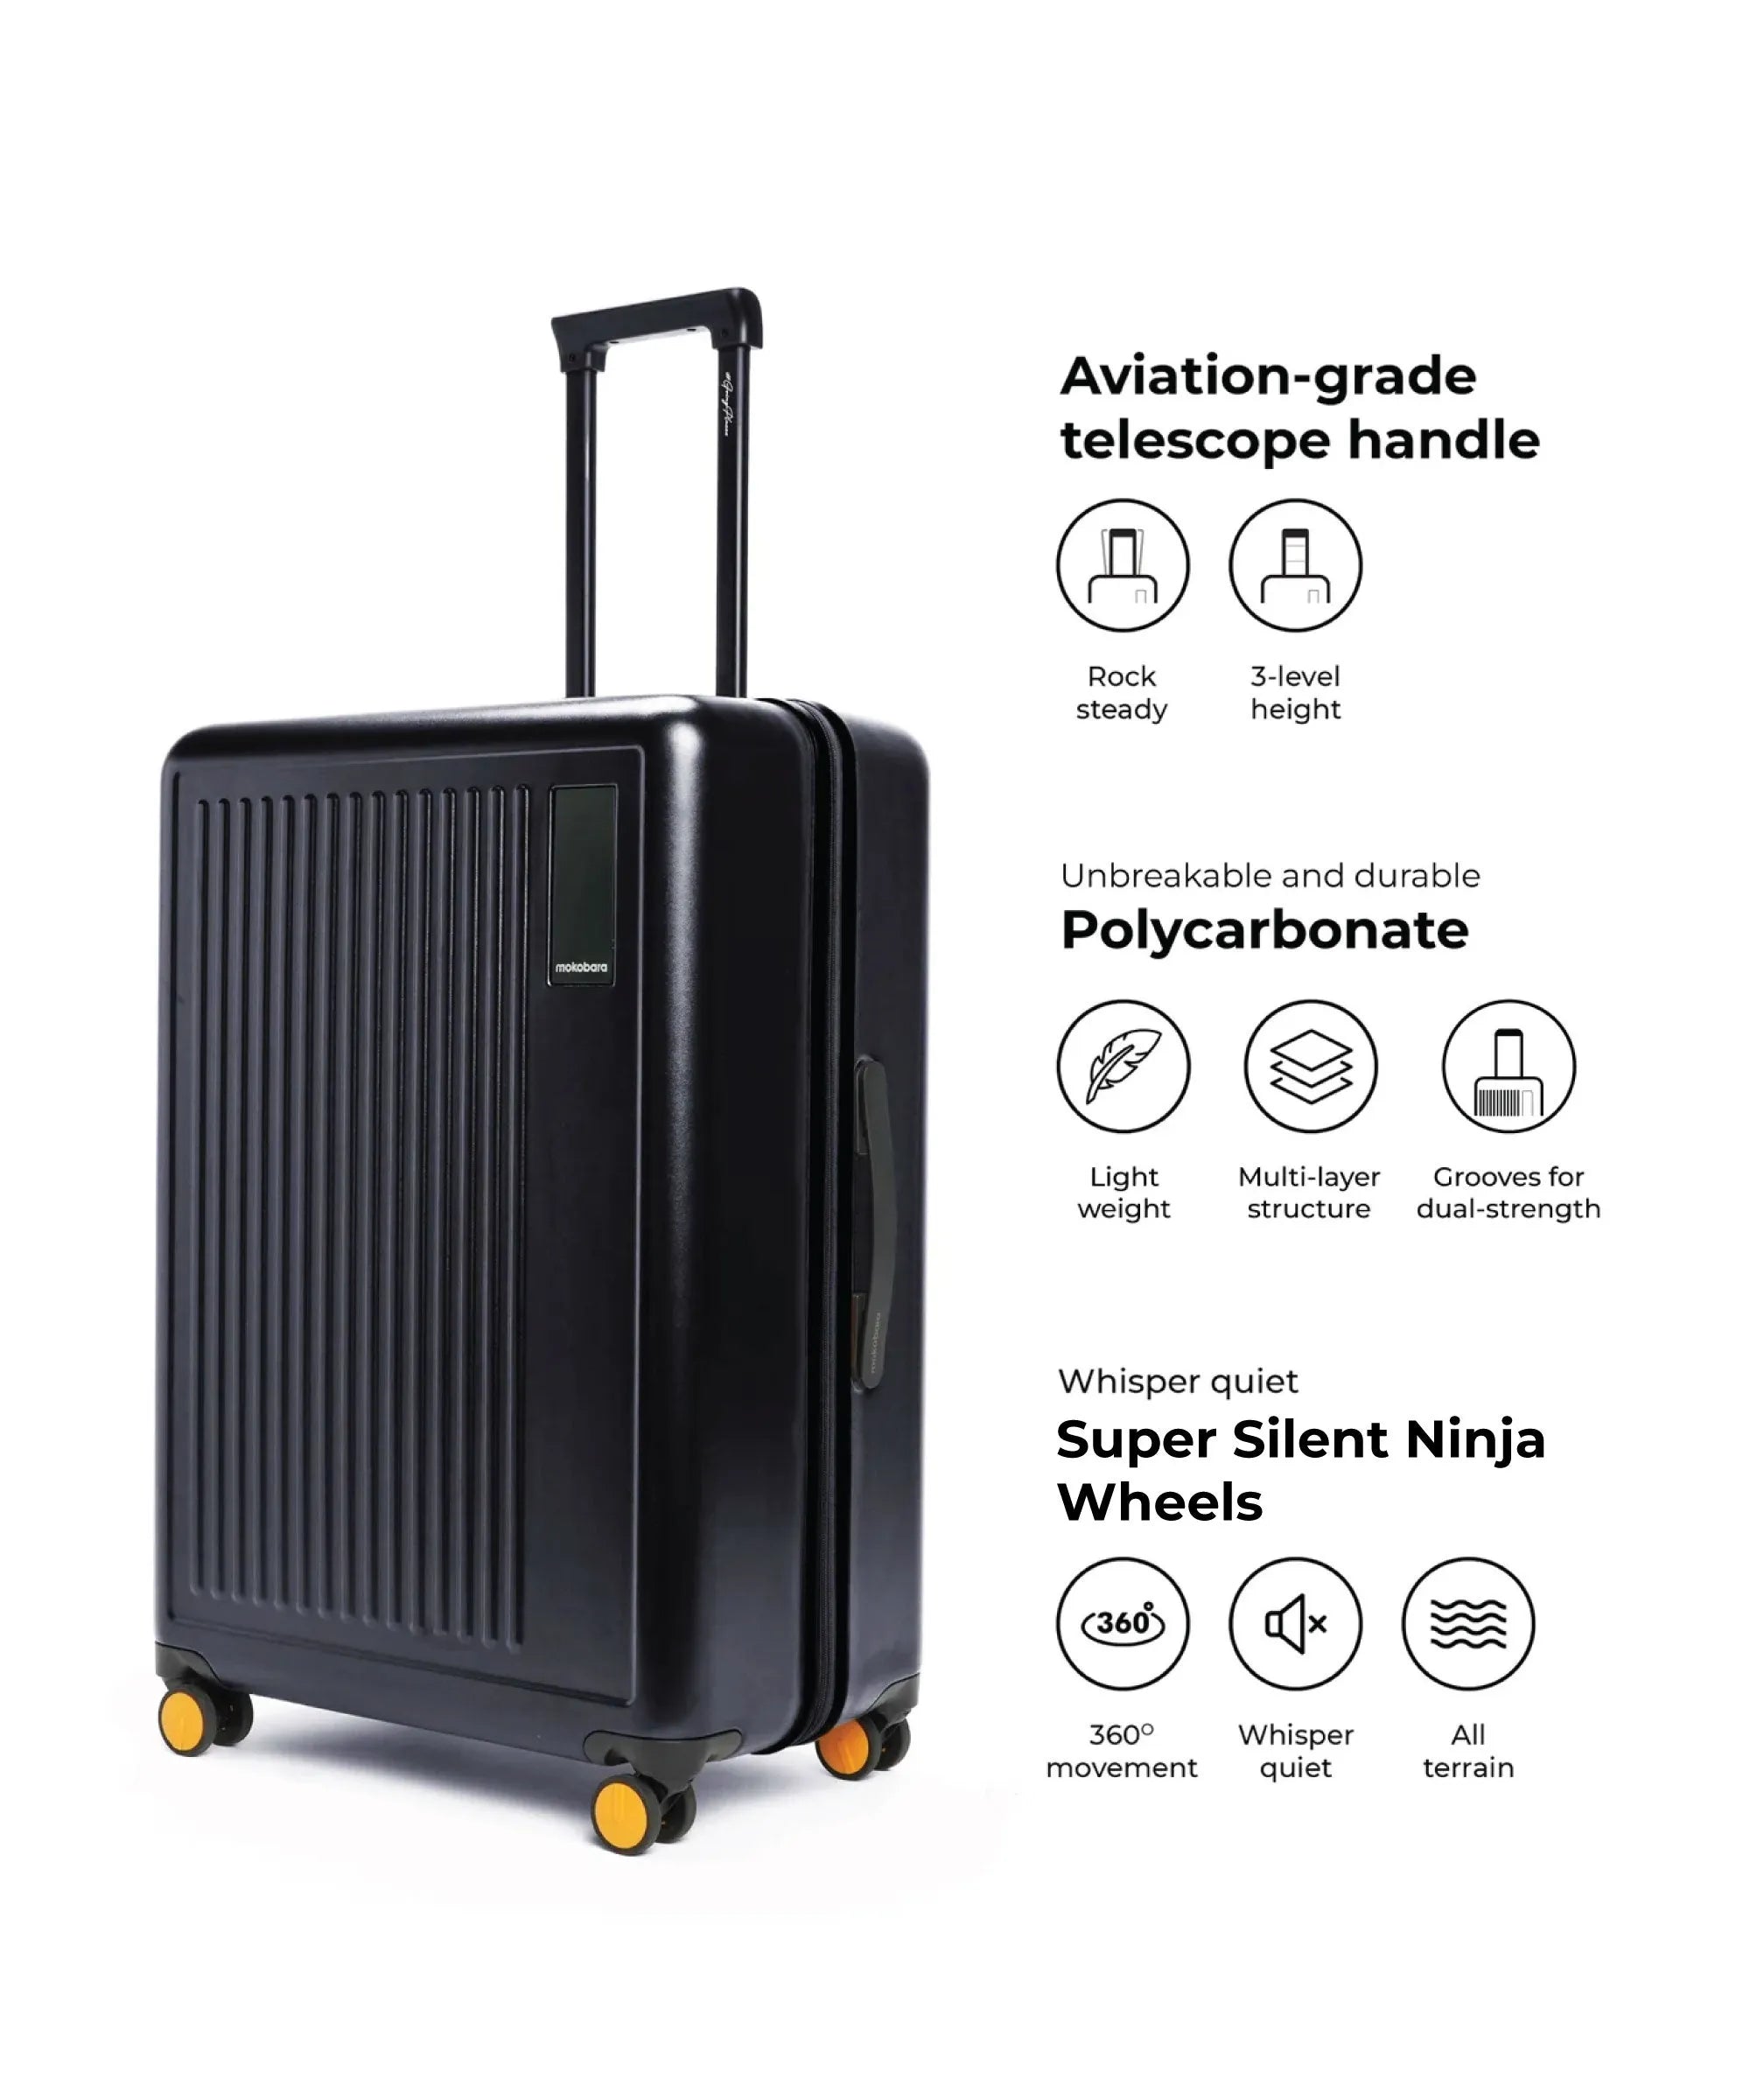 Color_Crypto | The Transit Luggage - Set of 3